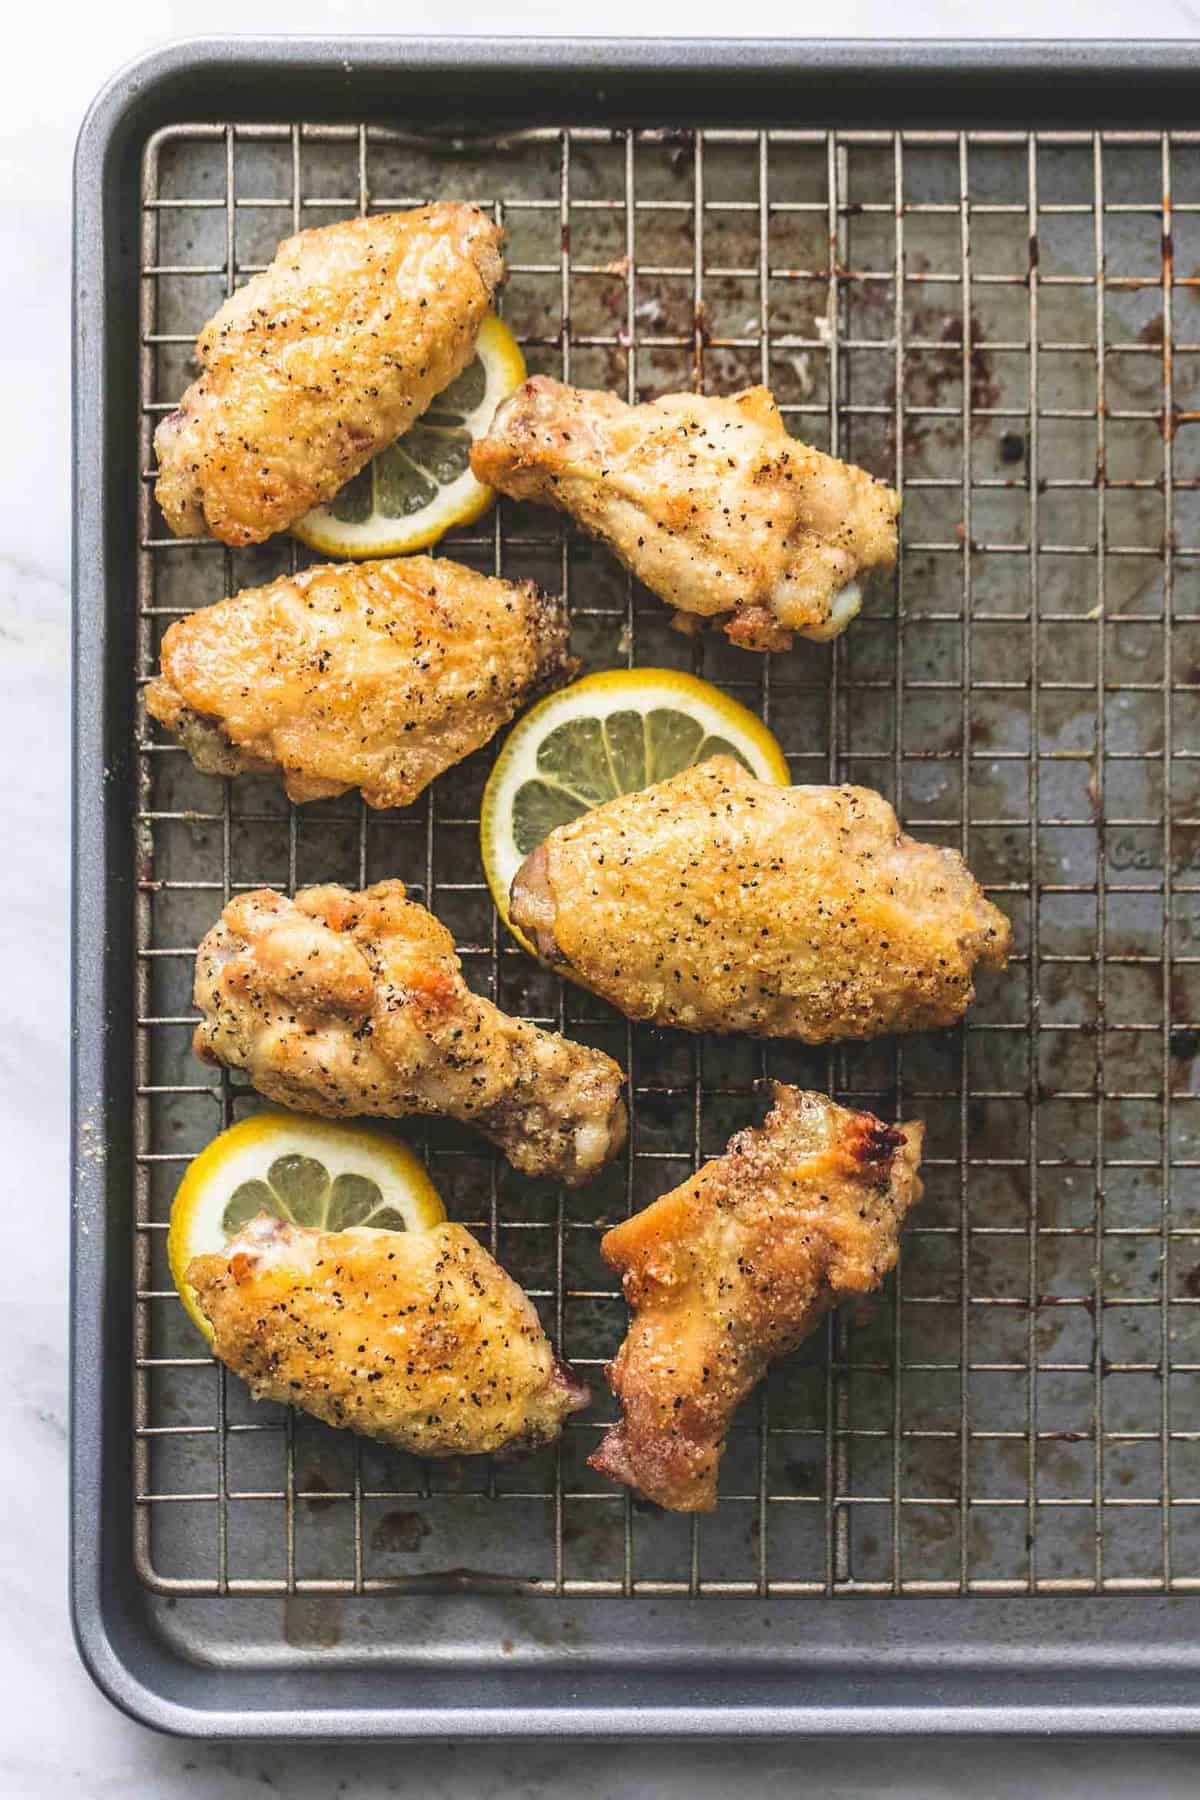 top view of baked lemon pepper chicken wings with lemon wheels underneath some of the wings all on a cooling rack on a baking sheet.